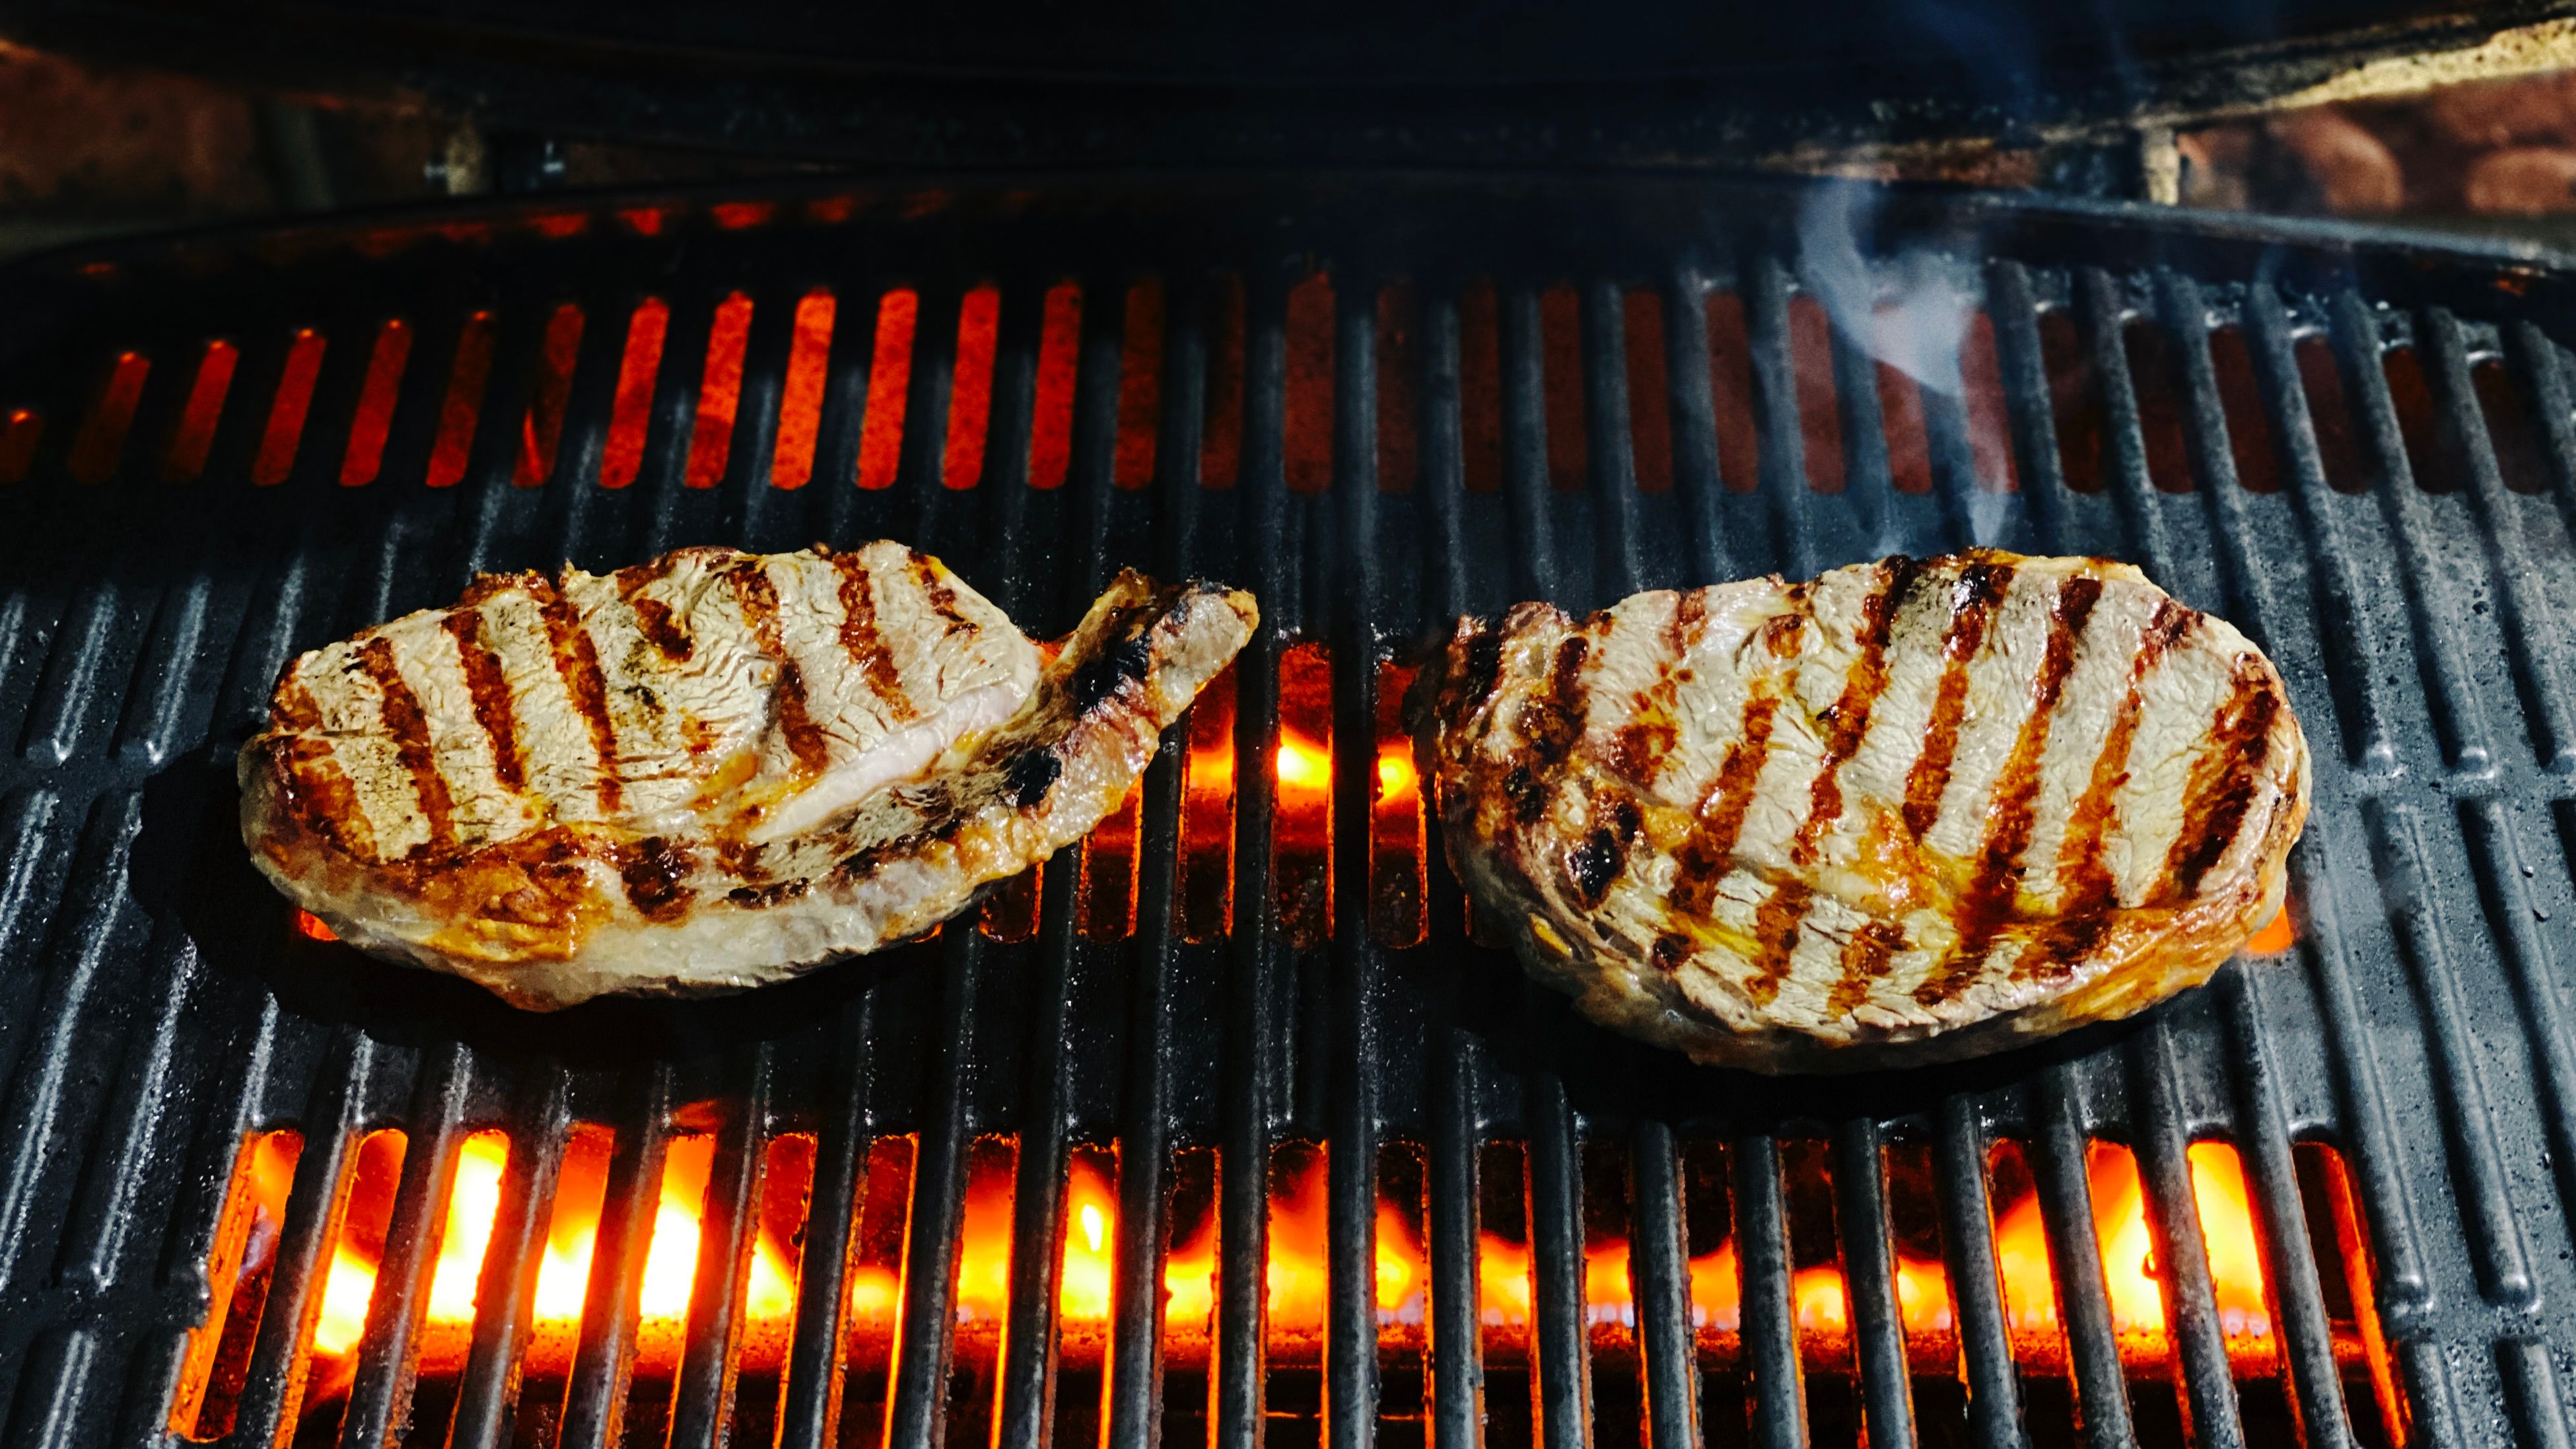 A photo of two seared steaks on a barbecue.